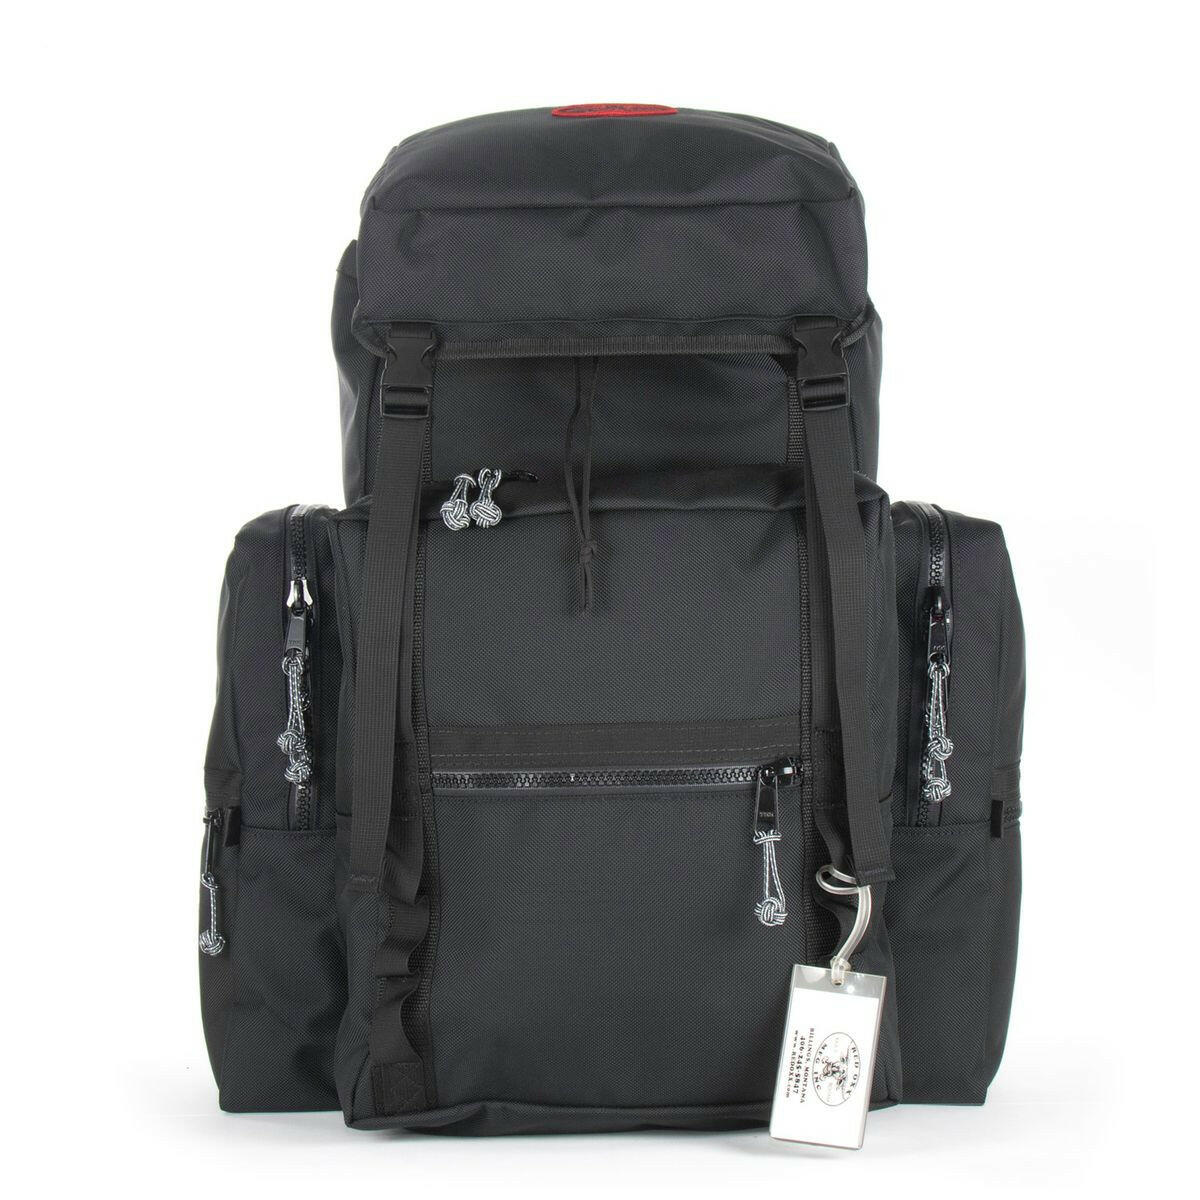 Front View of the Rail King Rucksack